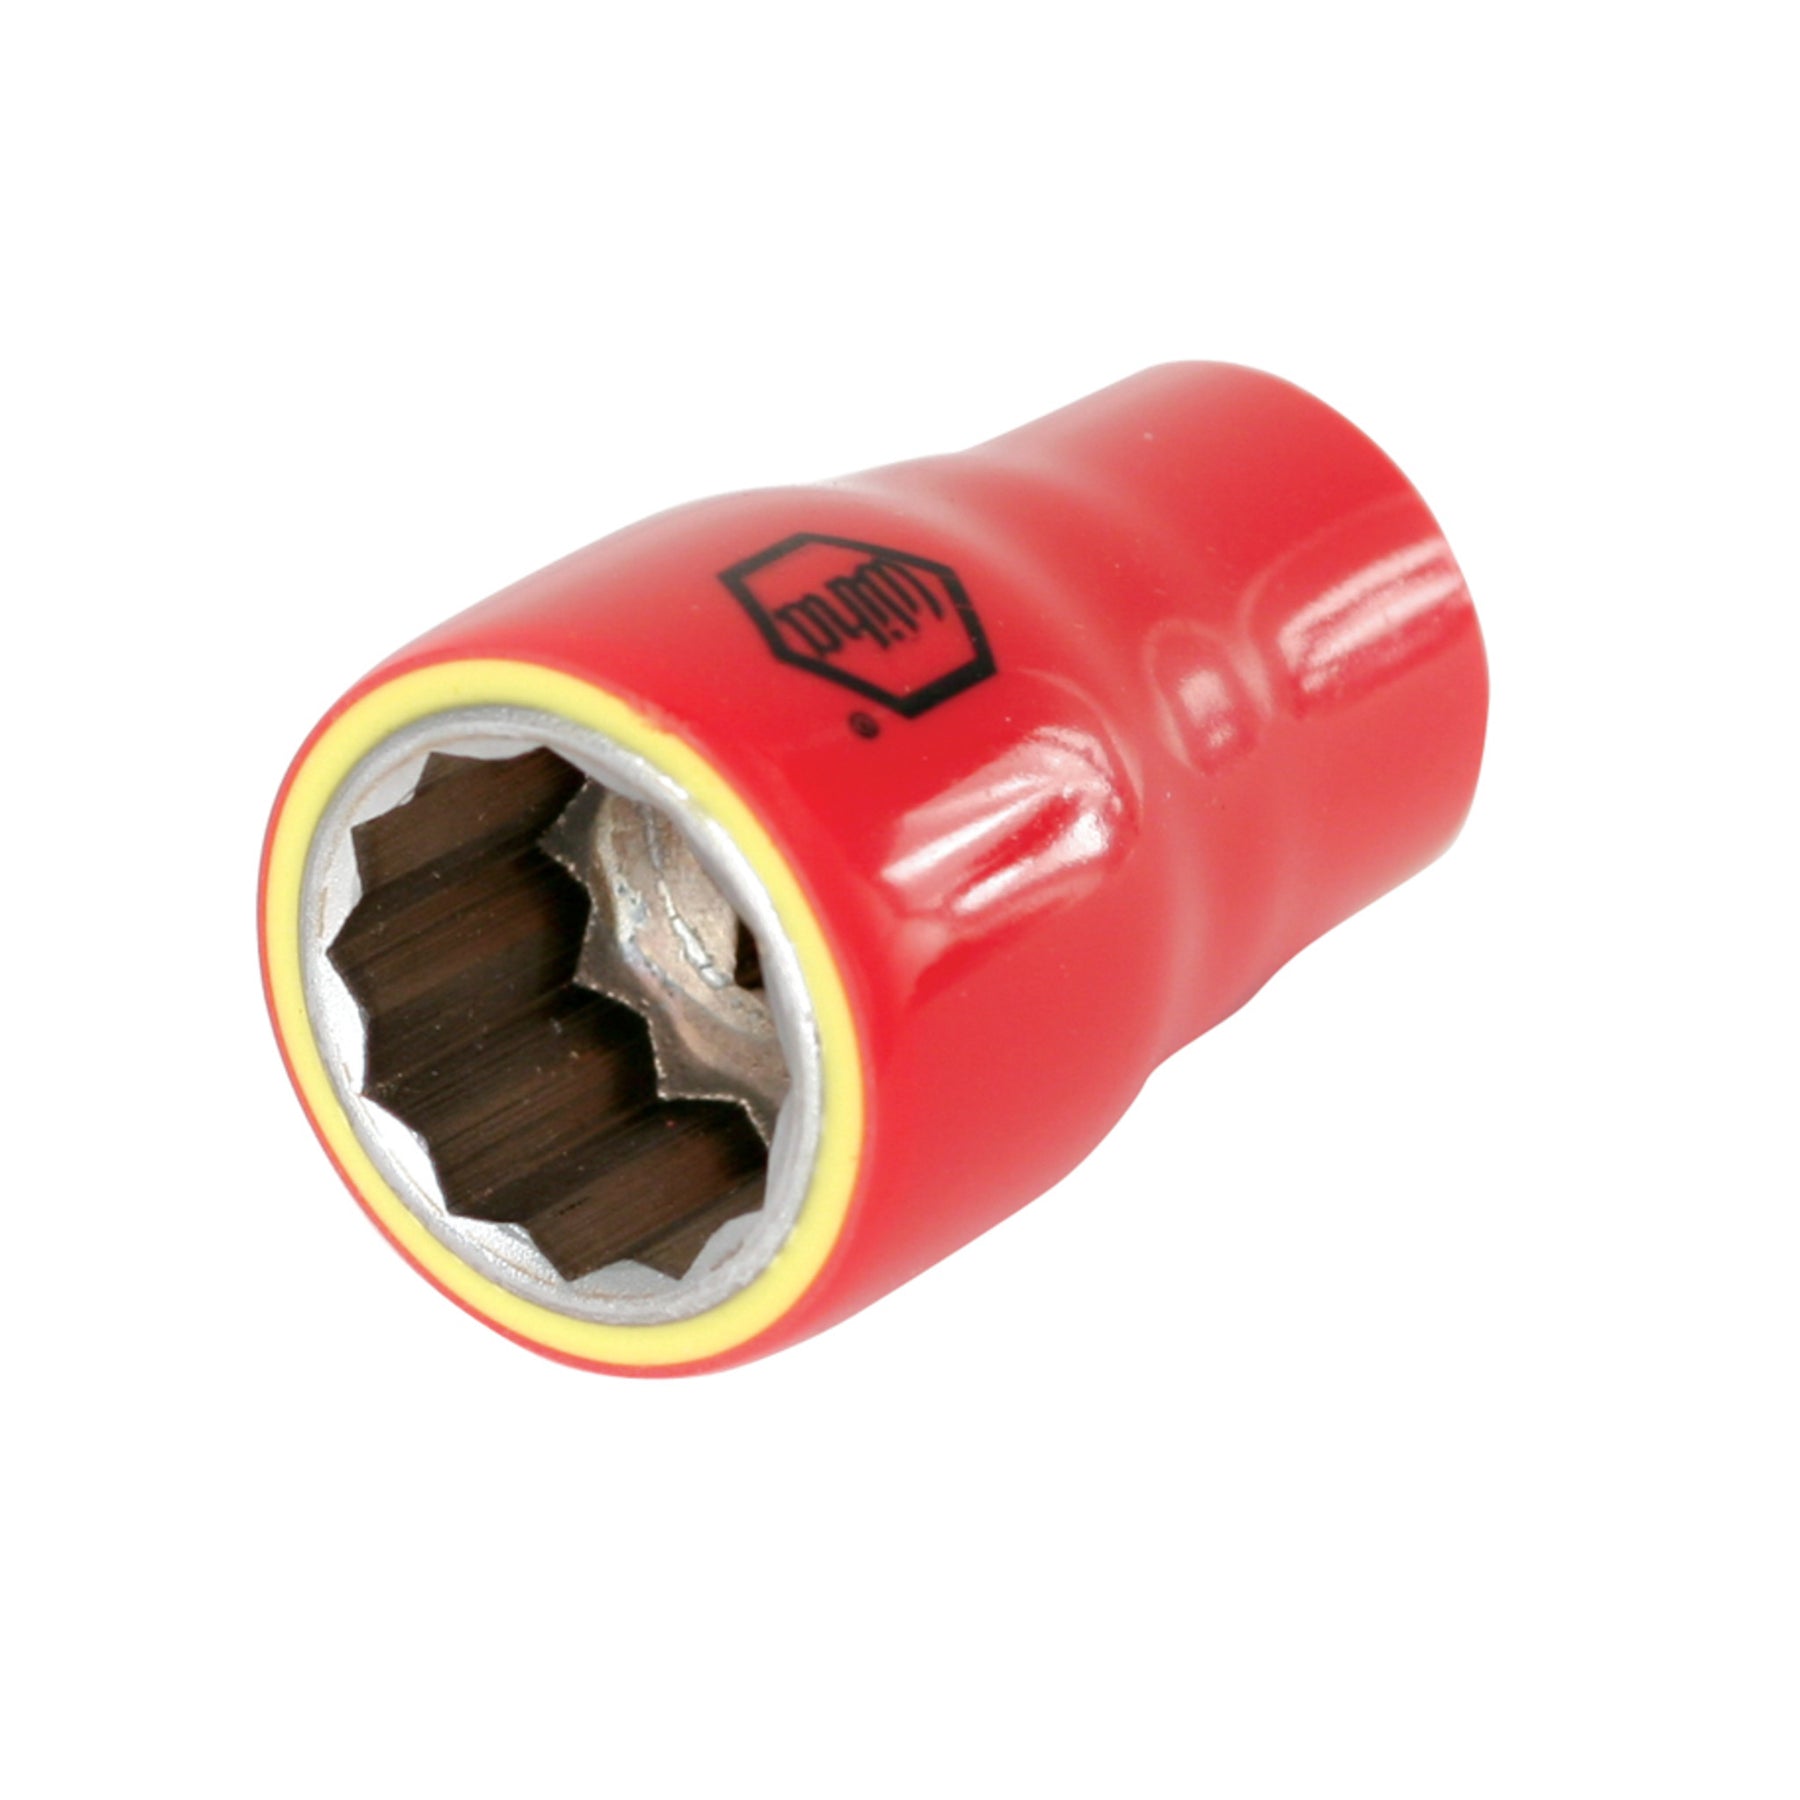 Insulated Socket 1/2" Drive 9mm